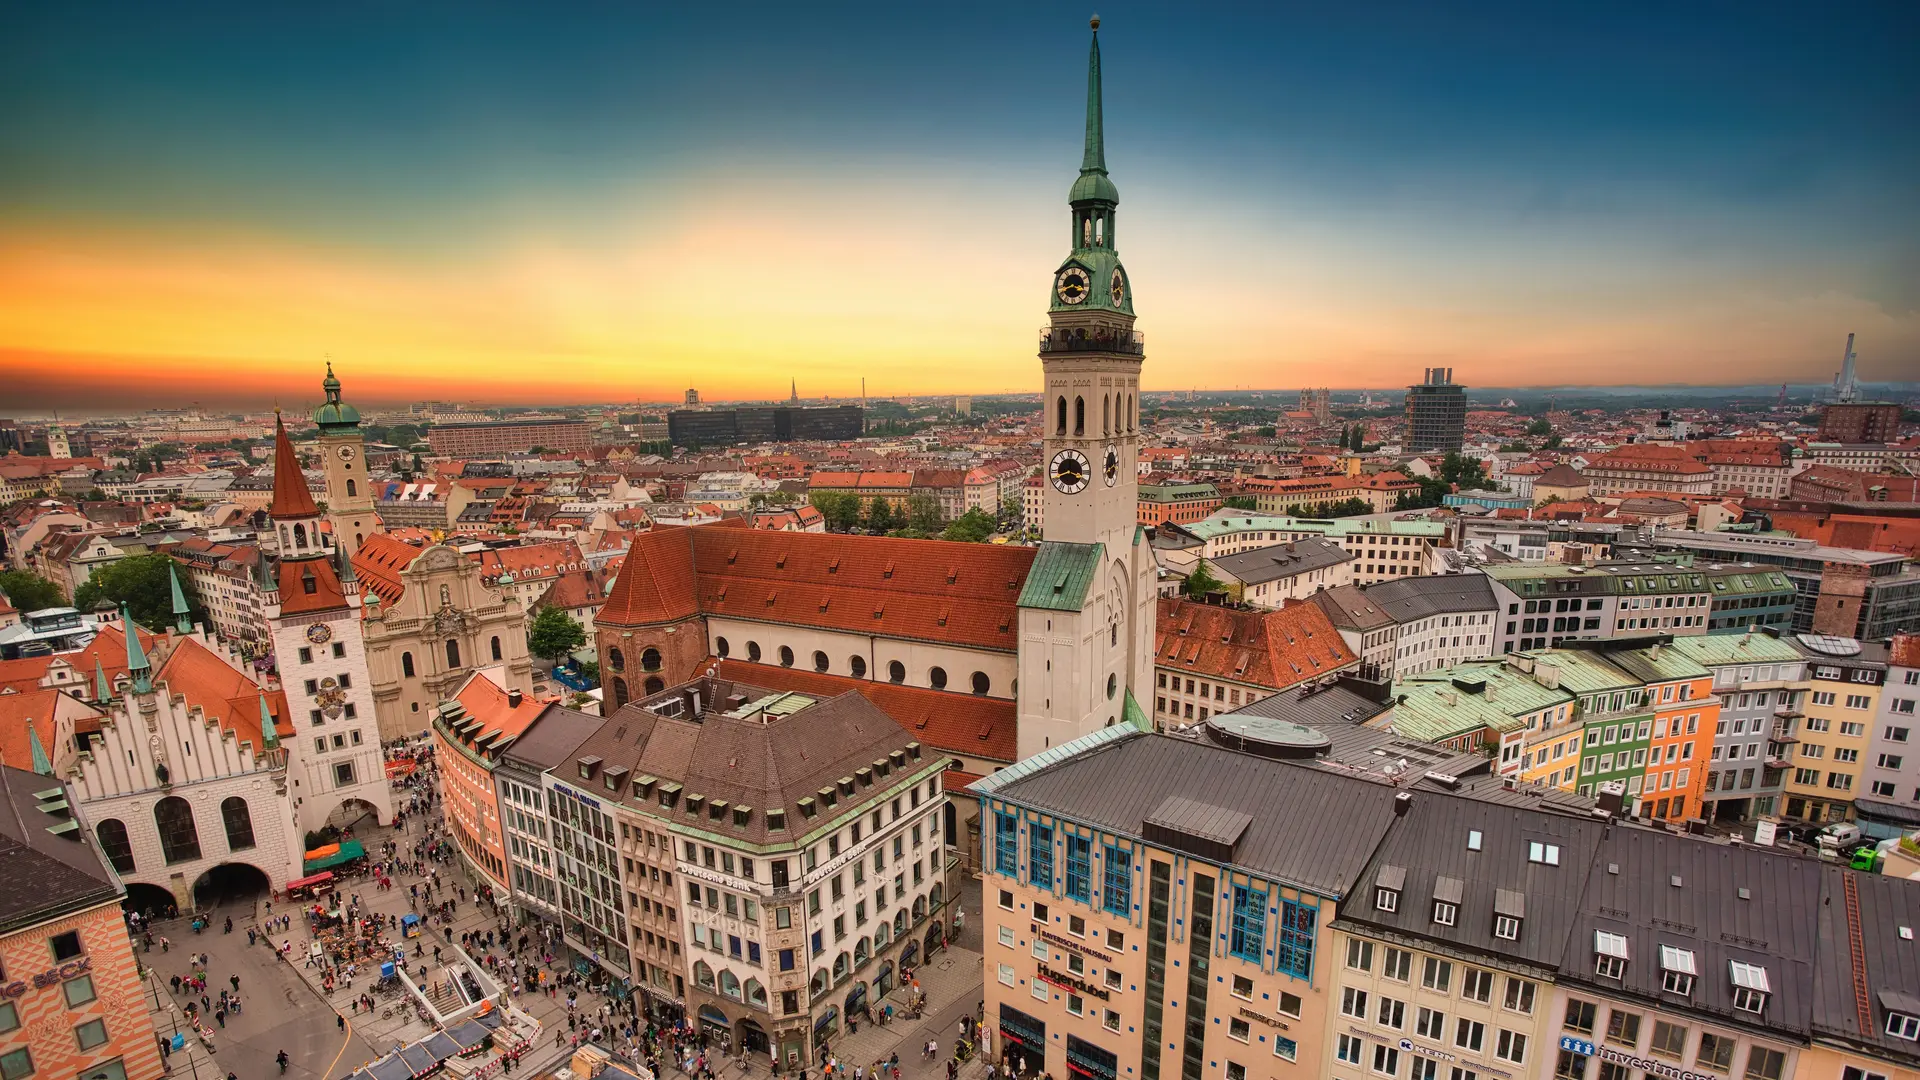 Bird view of Munich, Germany. Large buildings, people walking on the street and a colourful sunset and arcitechture.